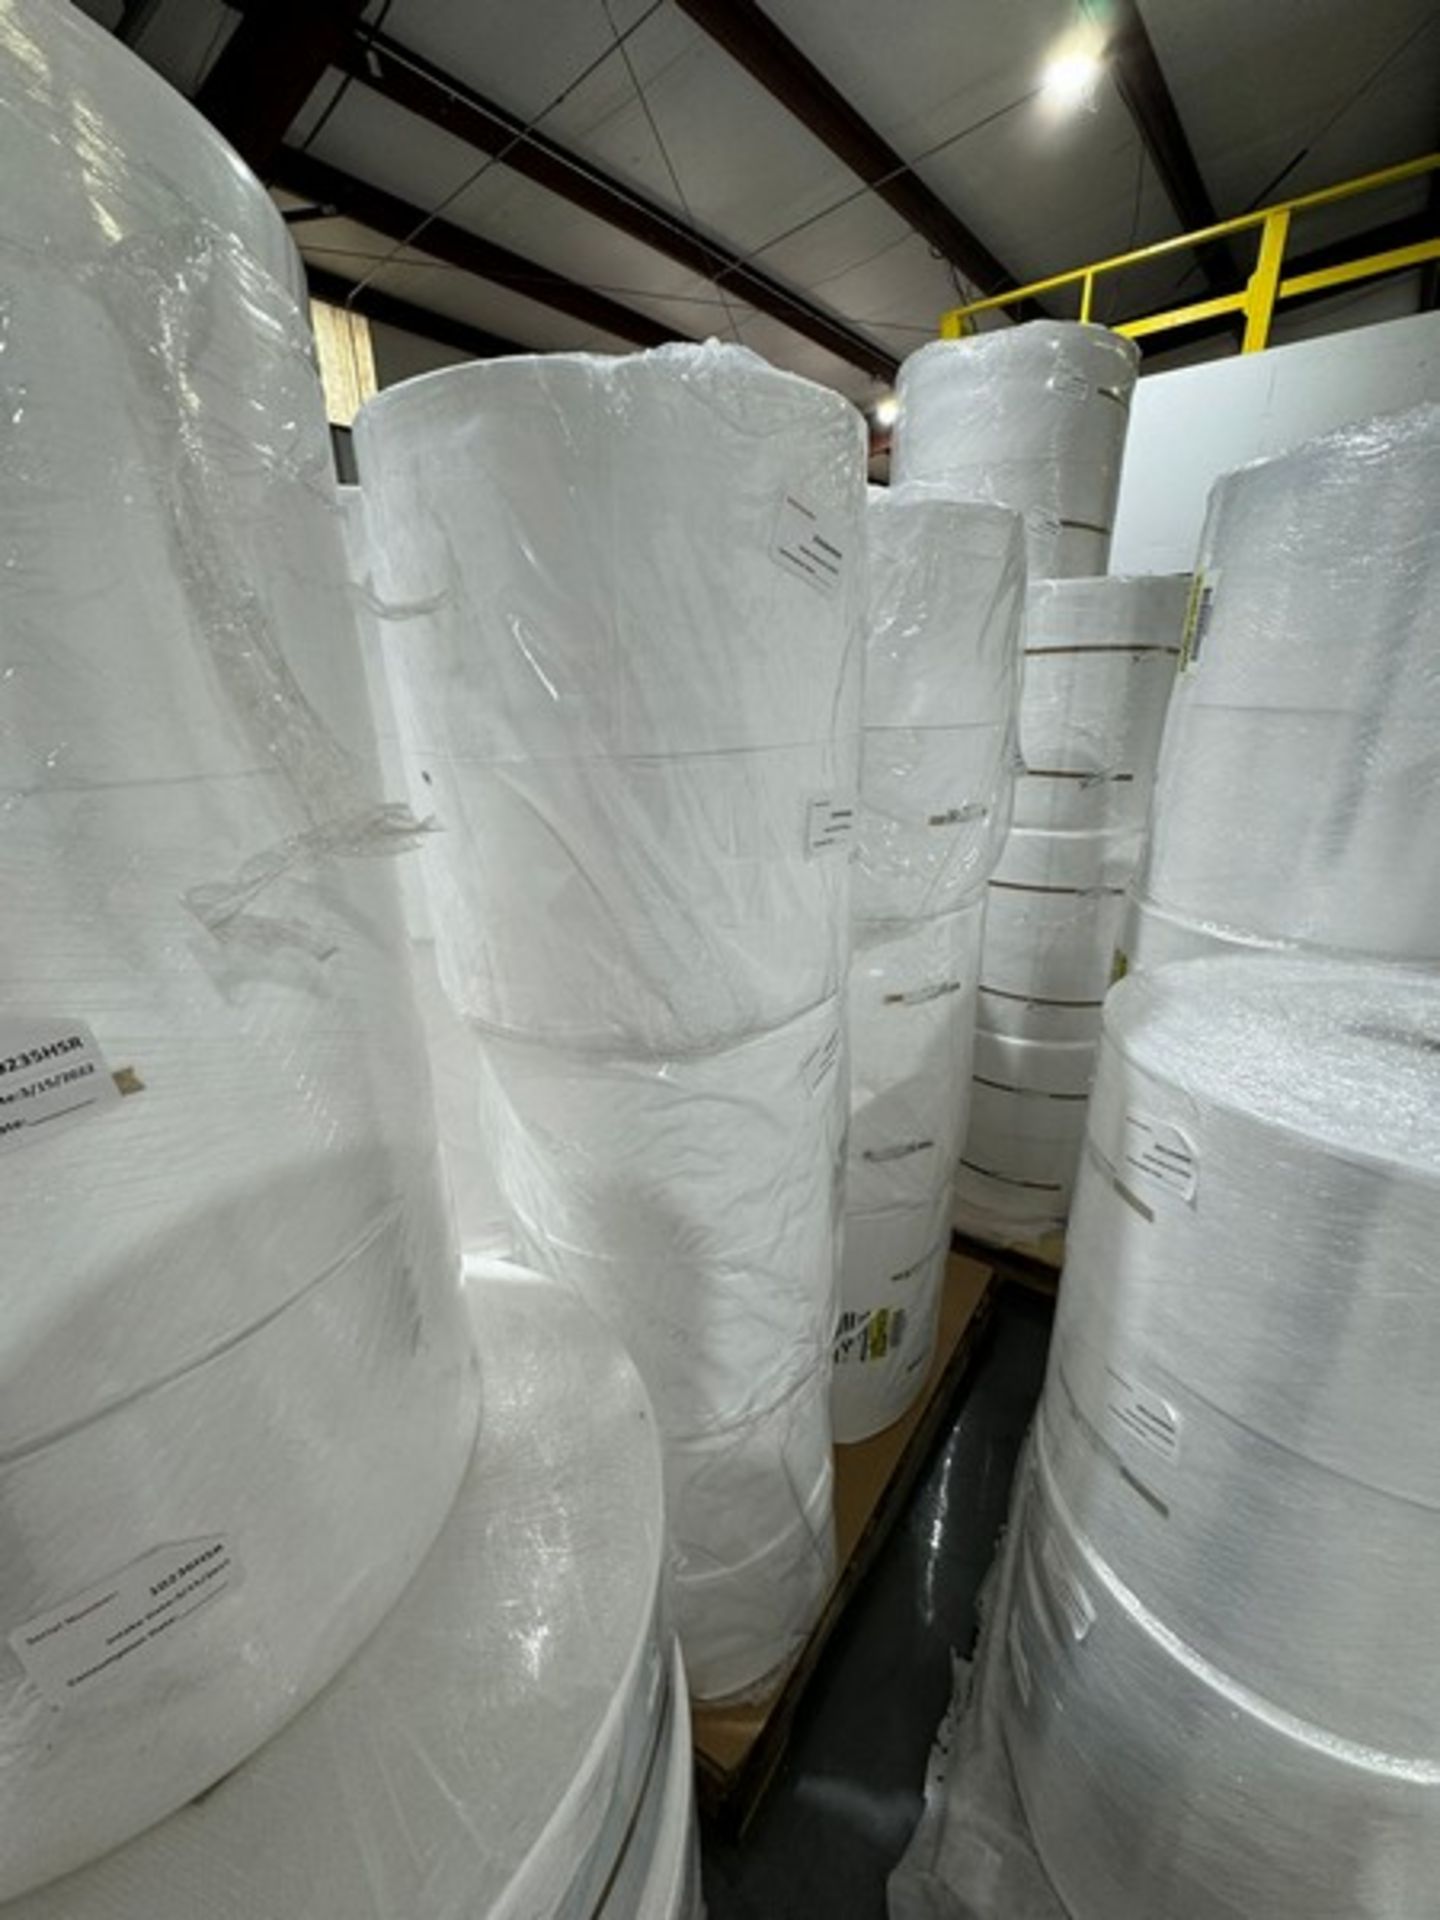 Lot of Assorted NEW Spun Bond and Monarch 100 Rolls, On 3-Pallets (LOCATED IN MOUNT HOME, AR) - Image 2 of 6